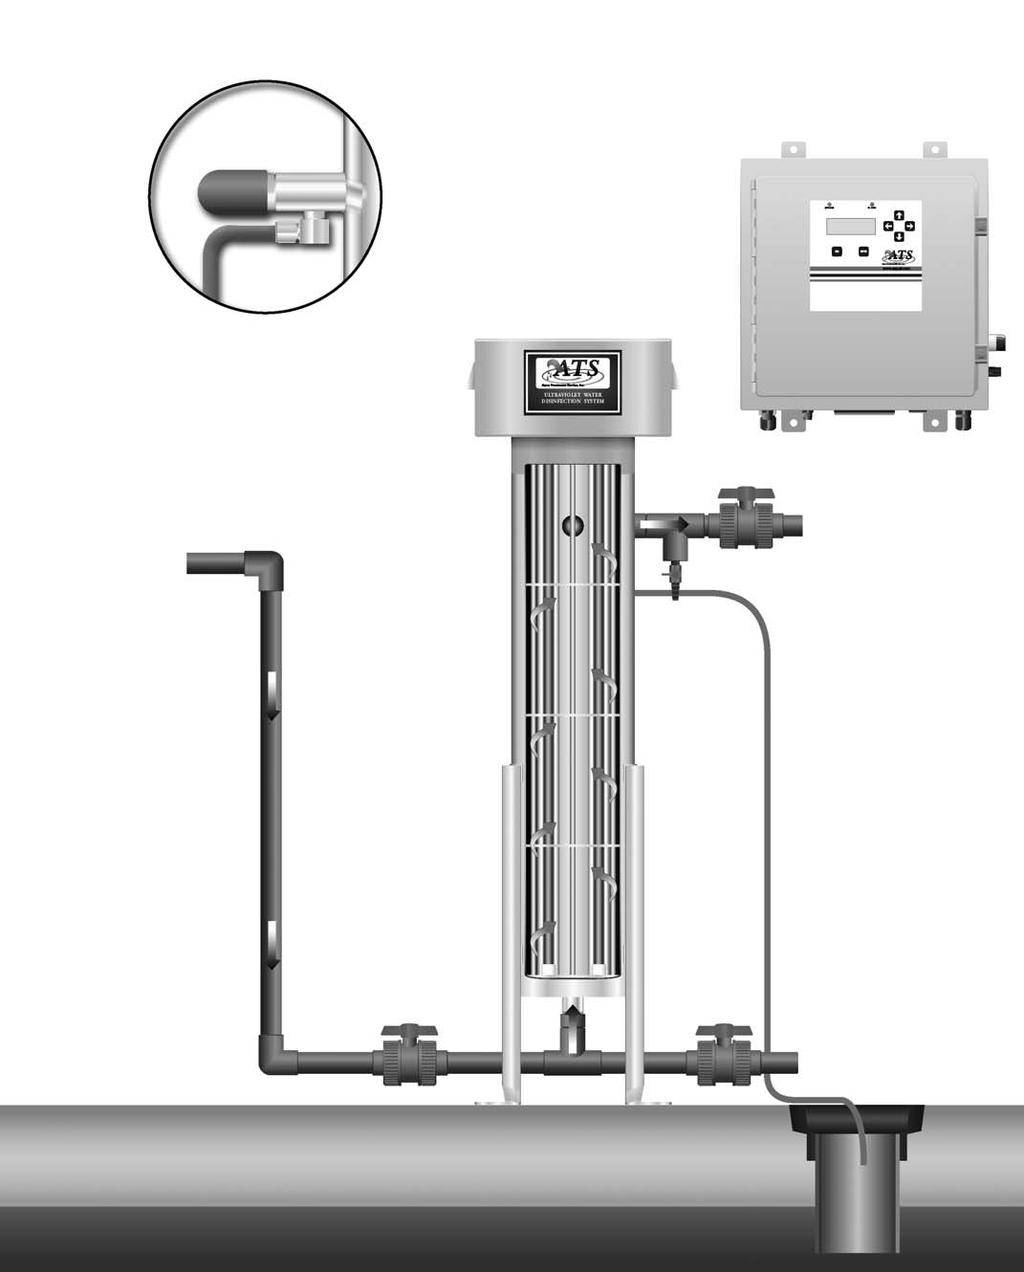 Installation Diagram Enlarged view of outlet with Thermal Relief Valve System Controls Thermal ReliefValve Optional-located on UV outlet Lamp Connection Housing Water influent Water effluent